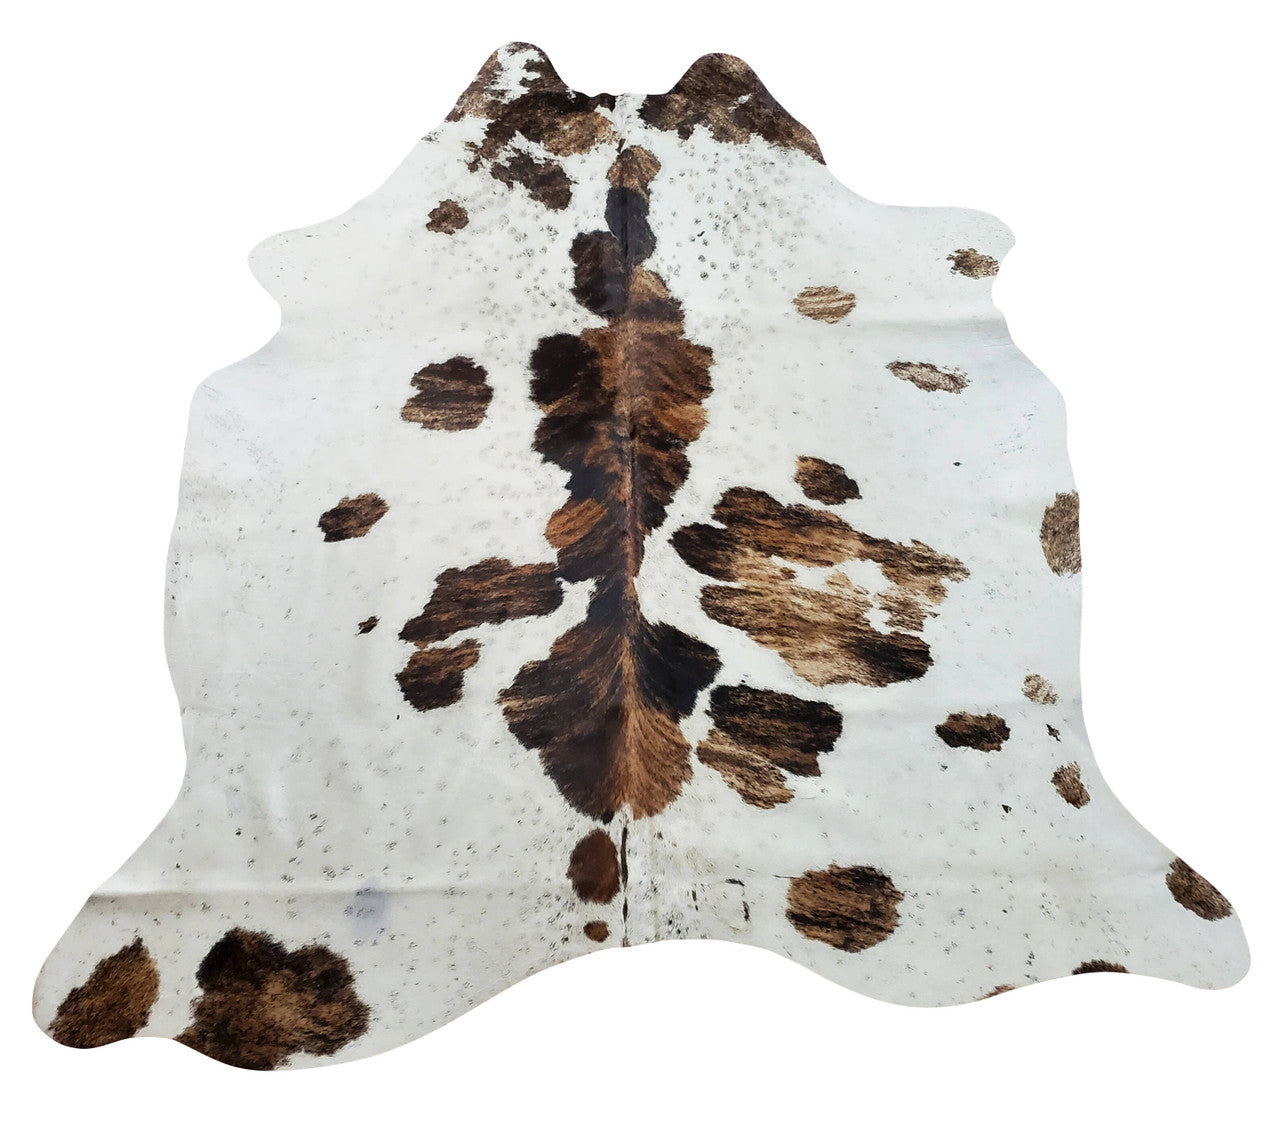 This speckled cowhide rug blends wonderfully into any decor. Very soft and naturally colored, it has a black, brown and white theme.
